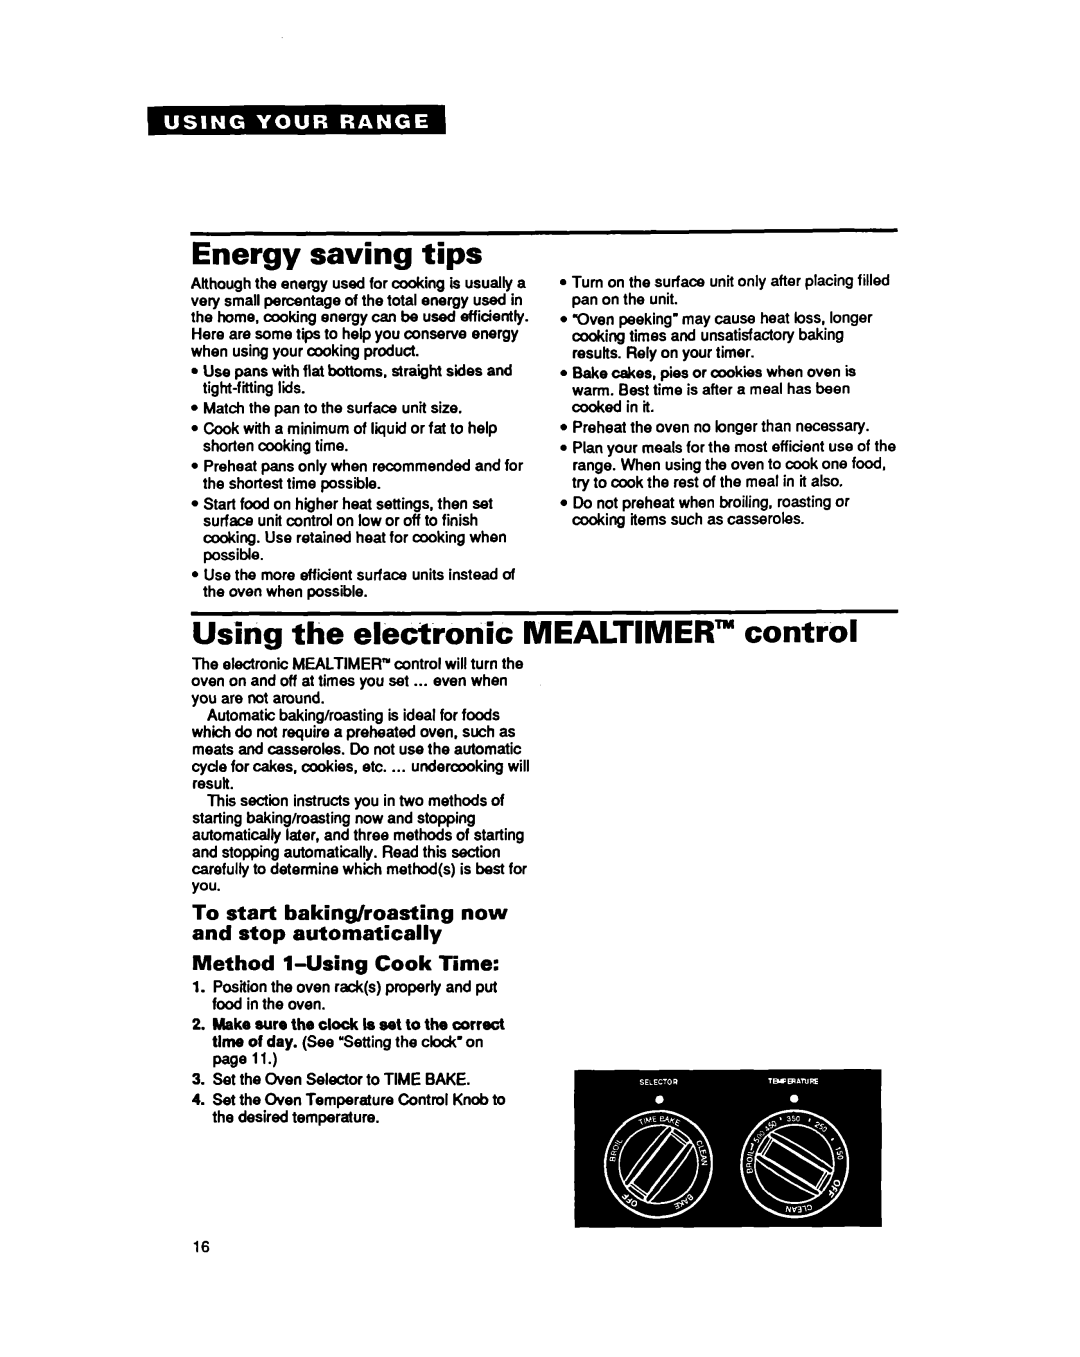 Whirlpool RF377PXY Energy saving tips, Using the elbctkotiic MEALTIMER” control, Method l-UsingCook Time 